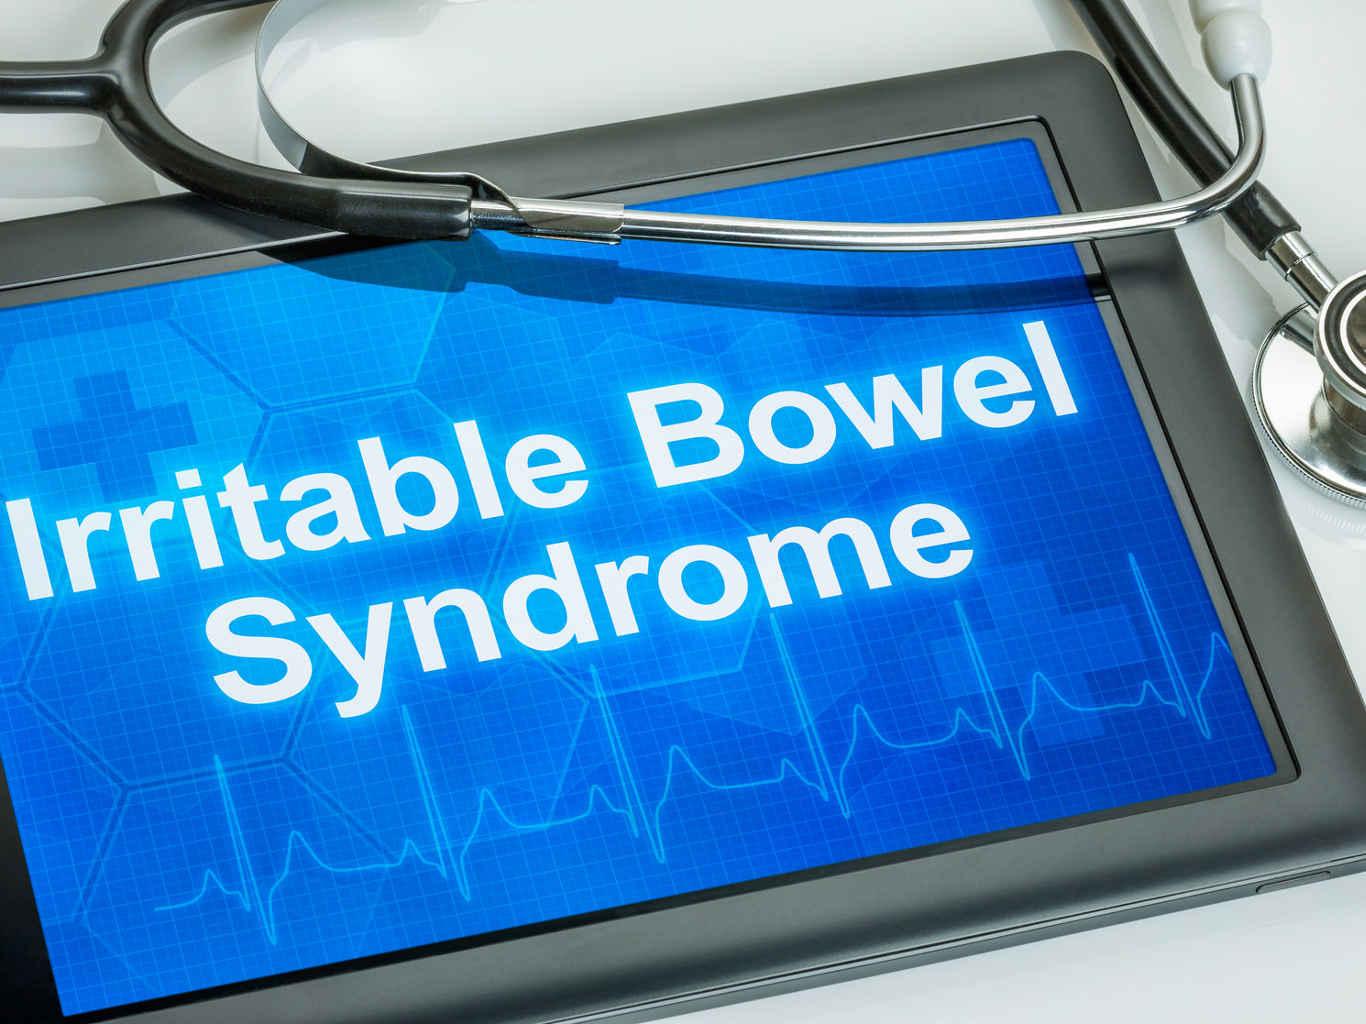 Tablet displaying 'Irritable Bowel Syndrome'